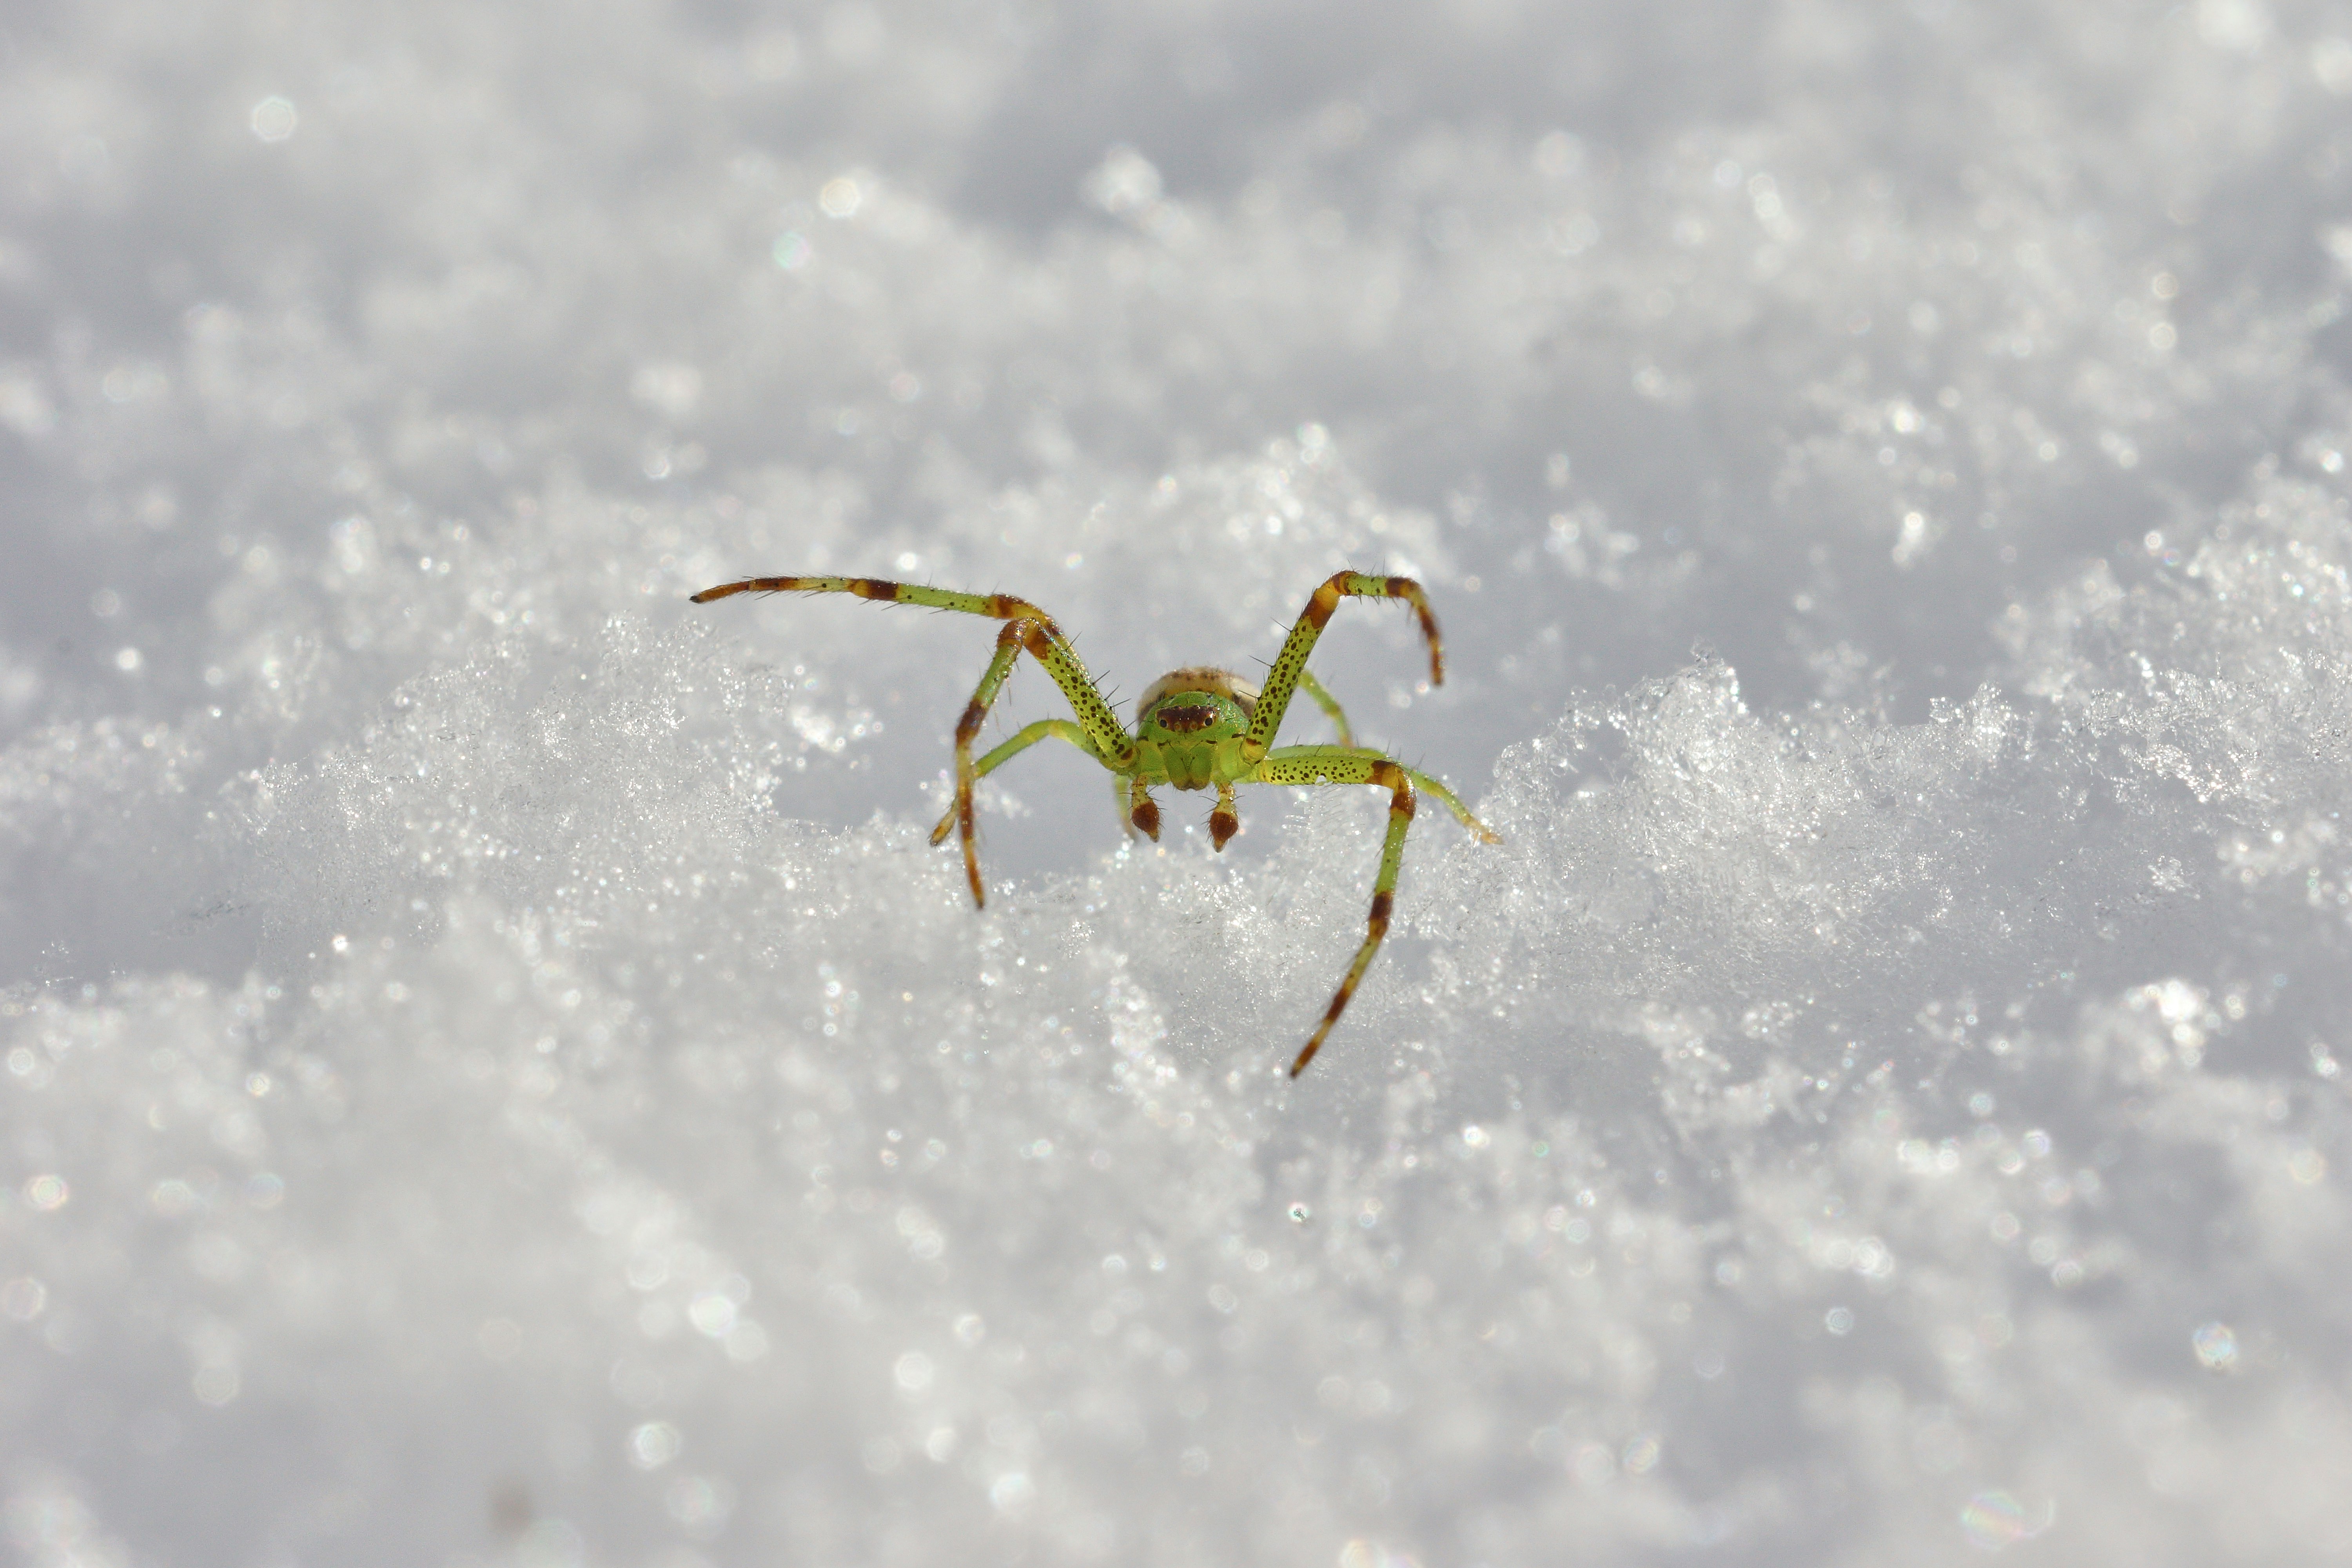 green spider on snow-covered ground